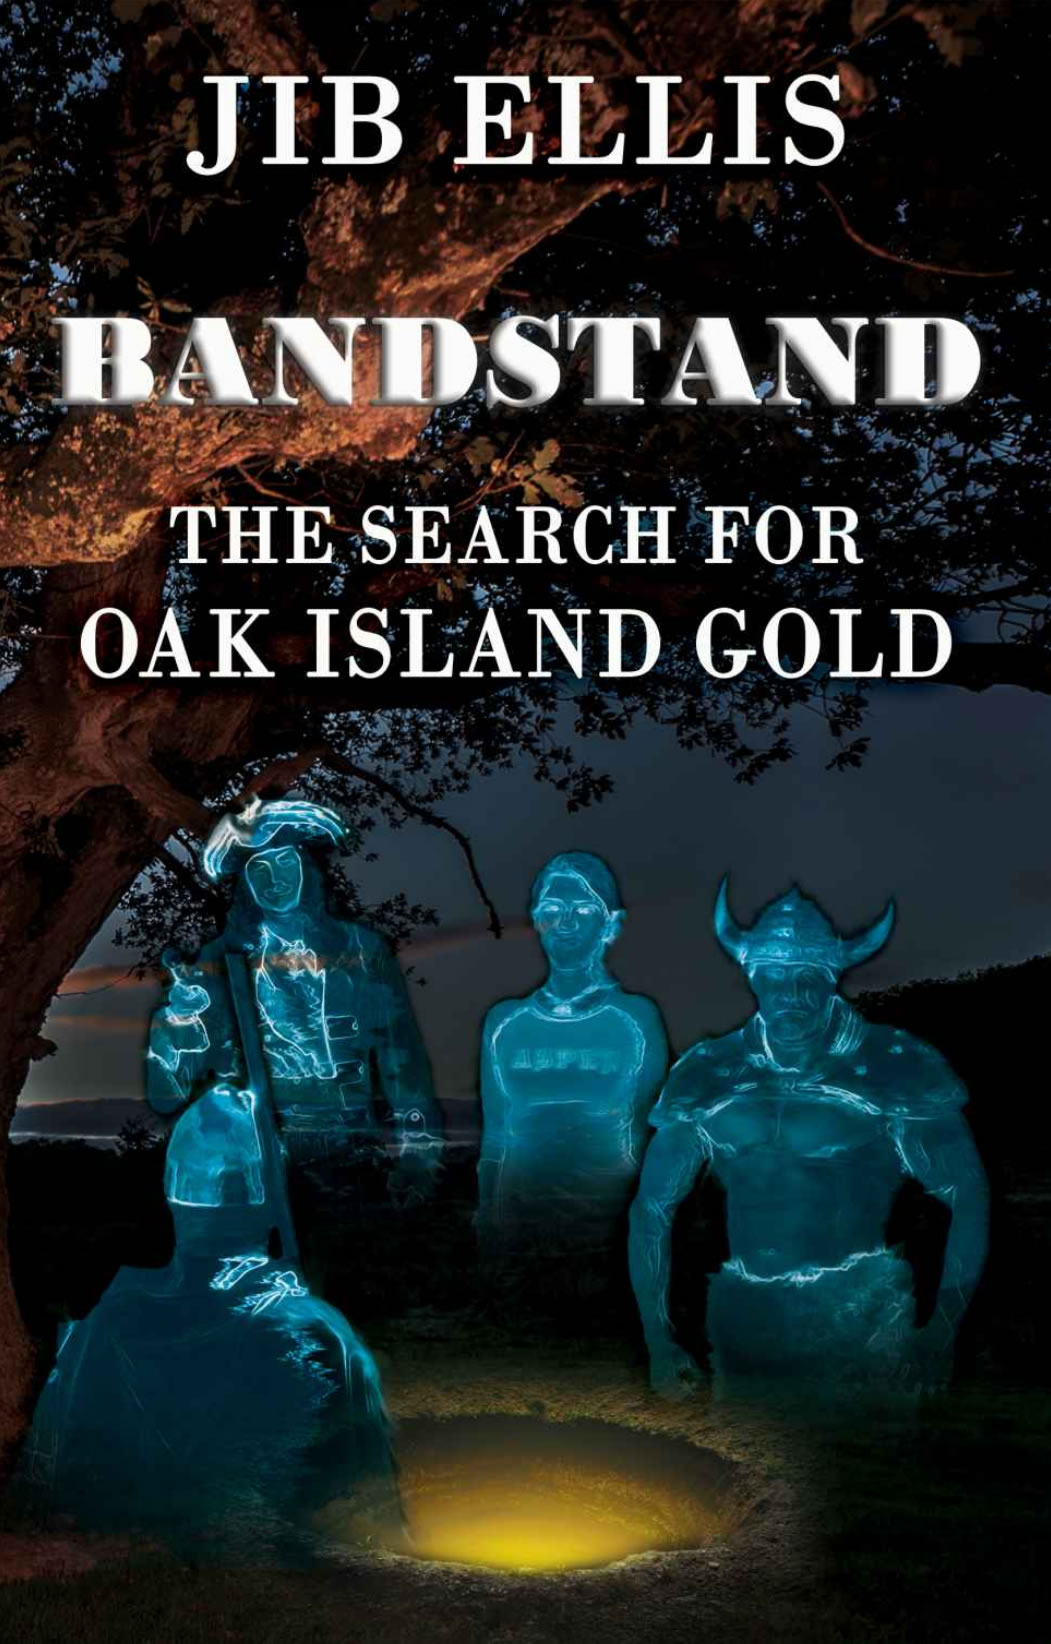 Bandstand, The Search for Oak Island Gold